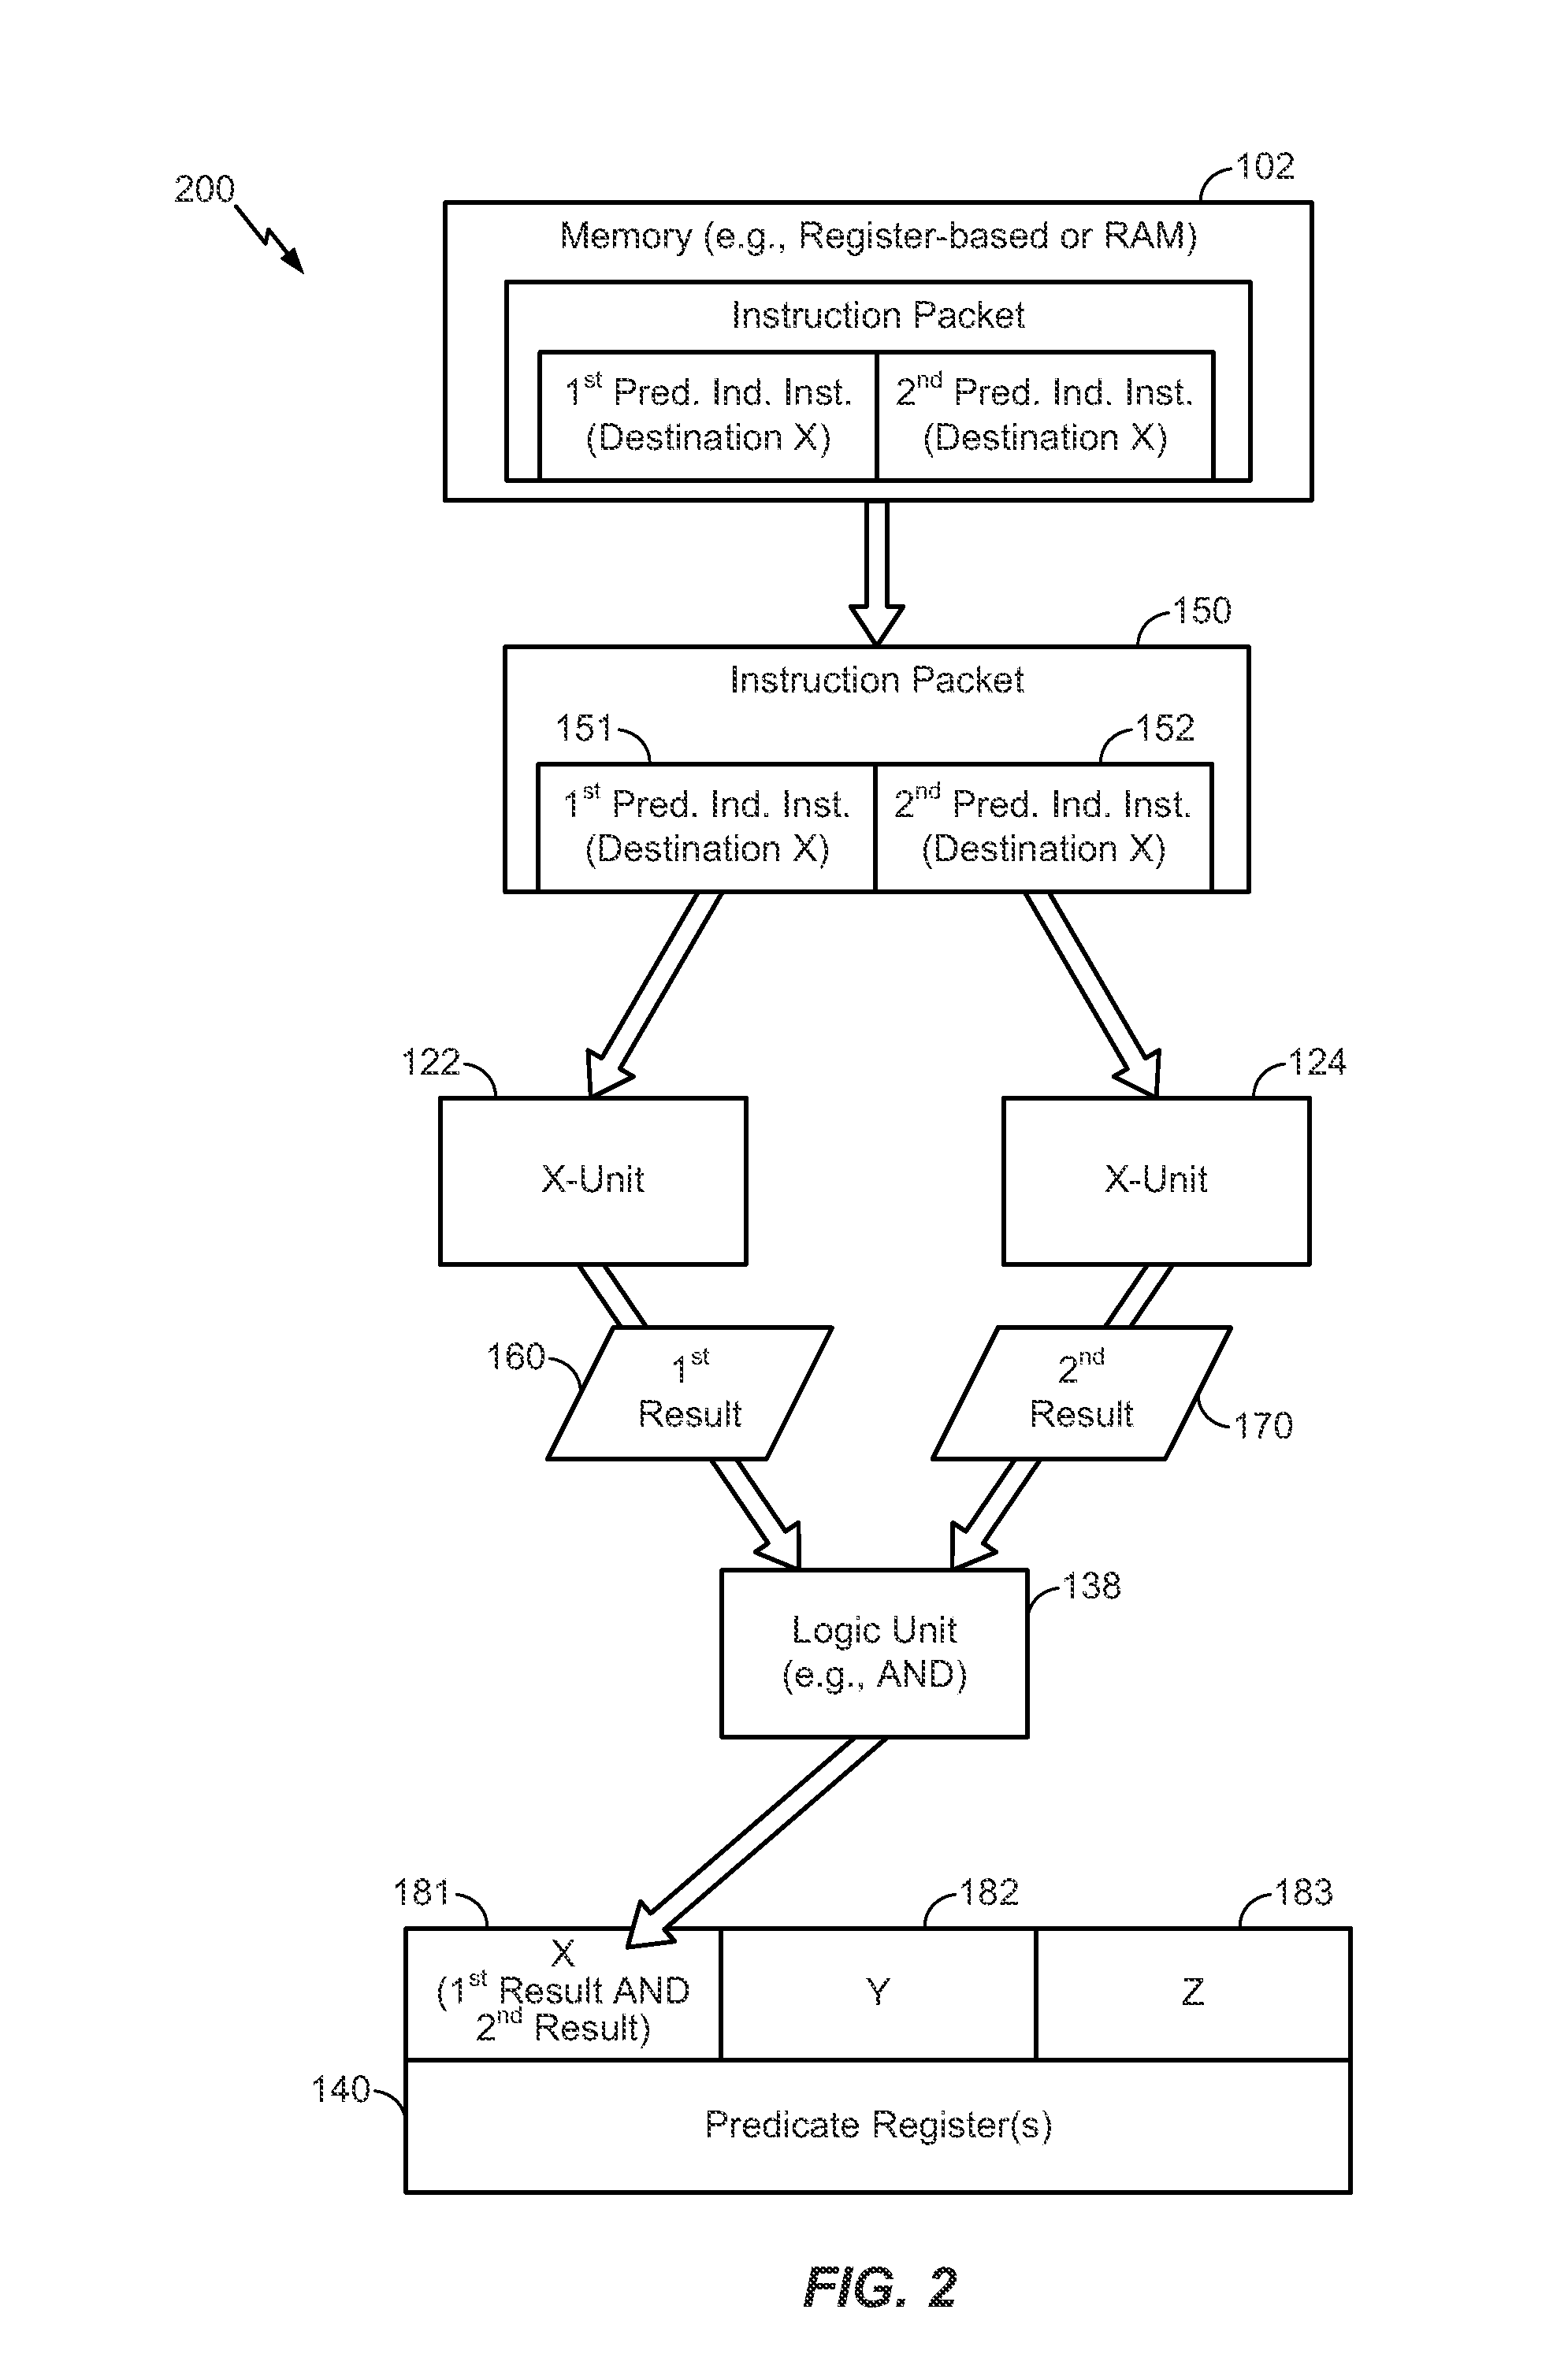 Executing instruction packet with multiple instructions with same destination by performing logical operation on results of instructions and storing the result to the destination